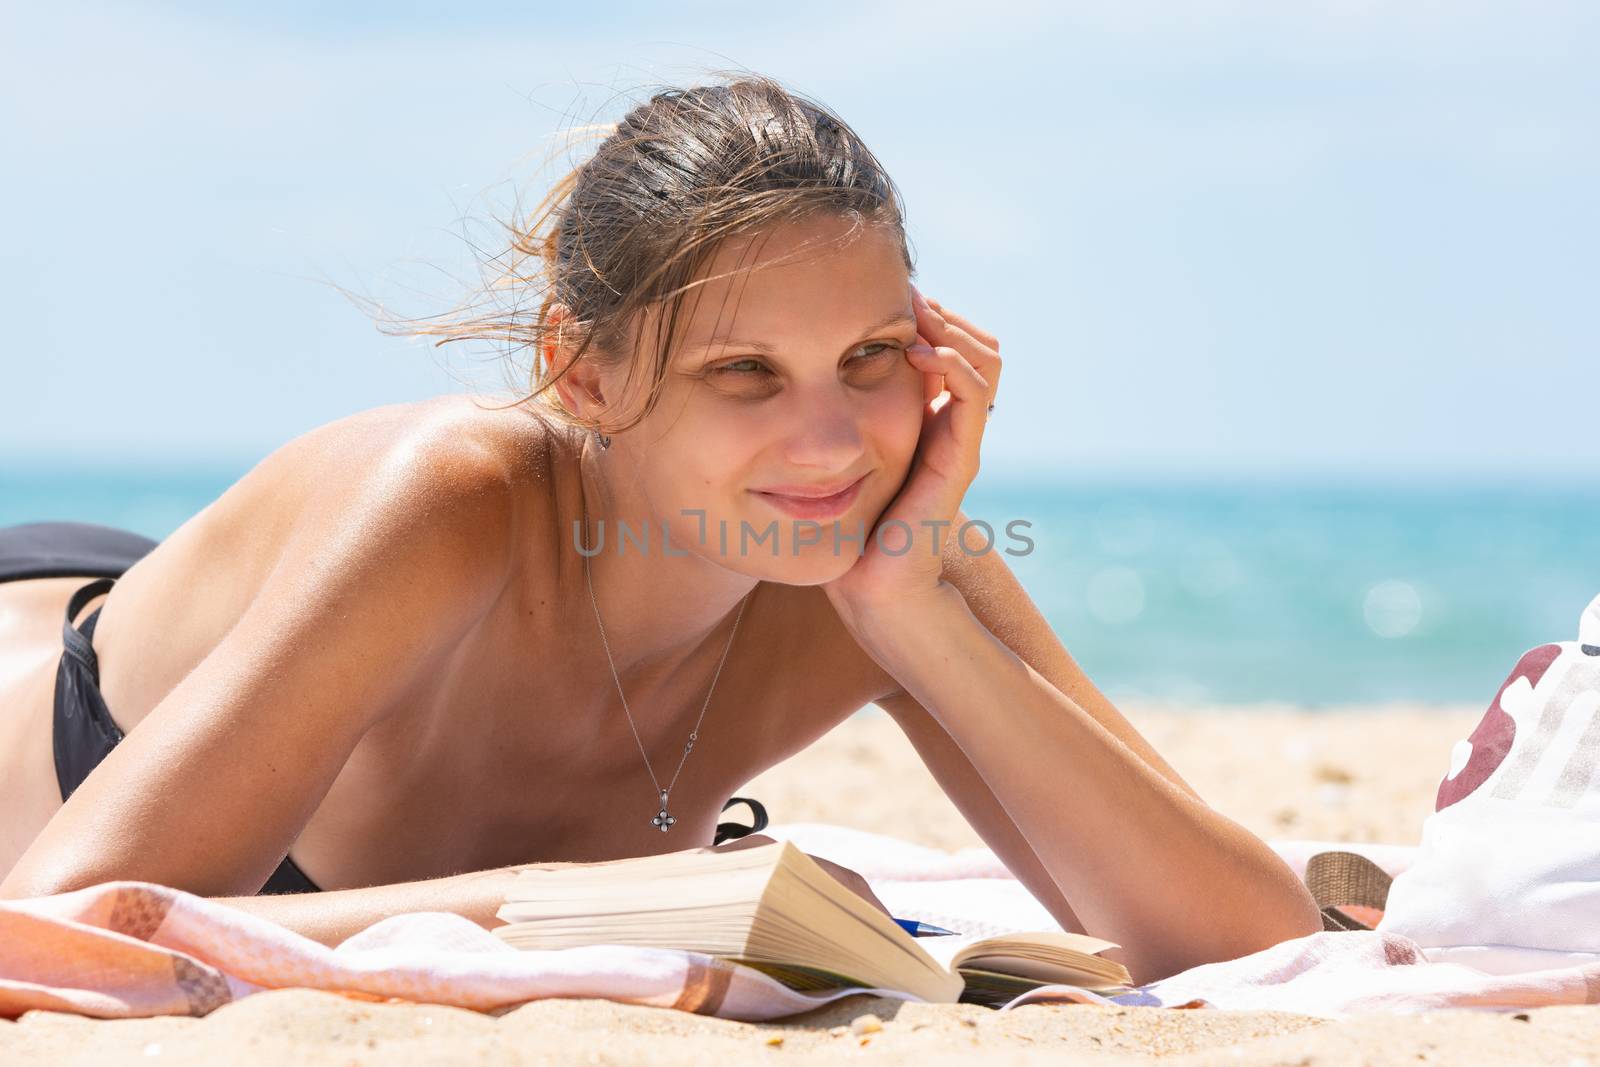 Girl dreamily looks into the distance lying on a sandy beach by the sea with a book